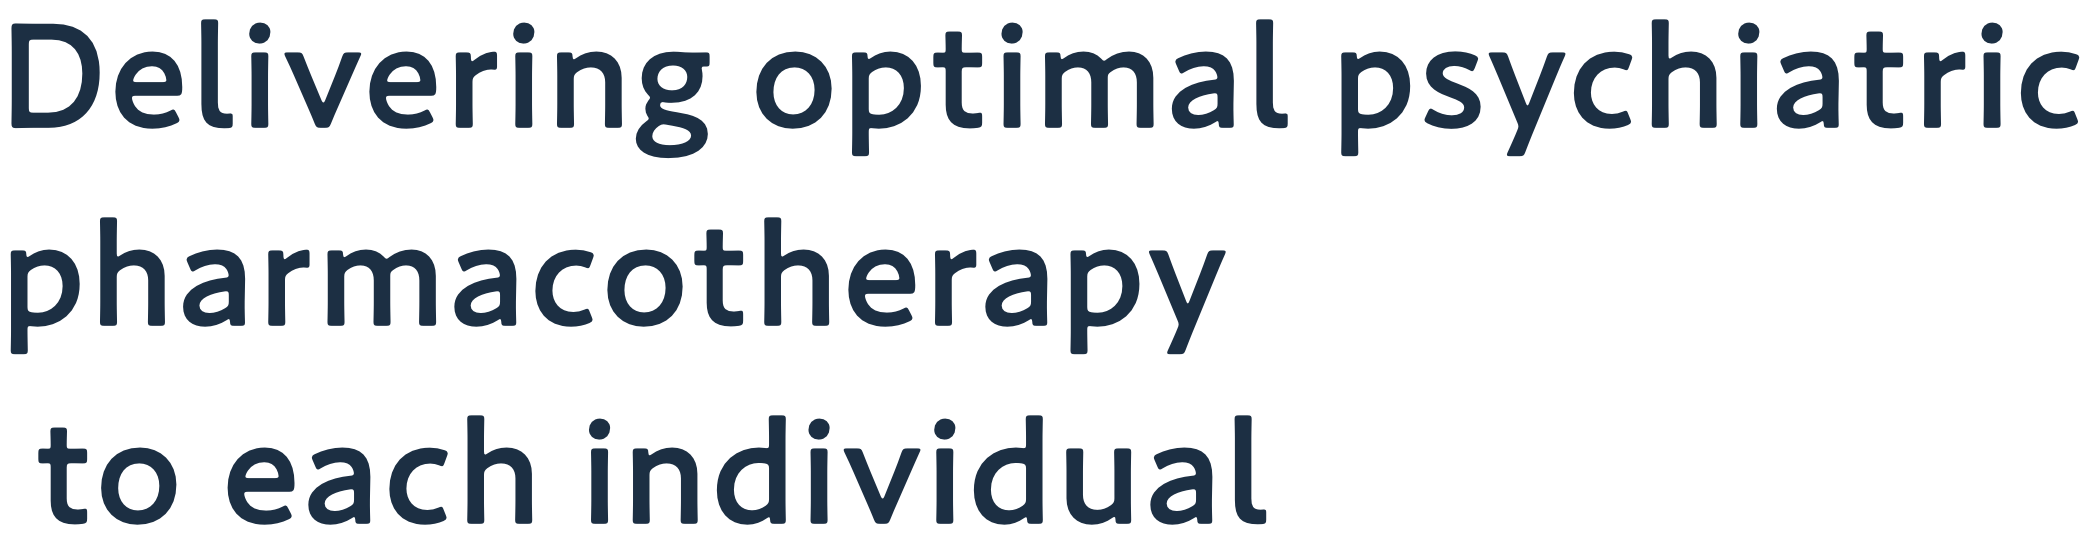 Delivering optimal psychiatric pharmacotherapy to each individual